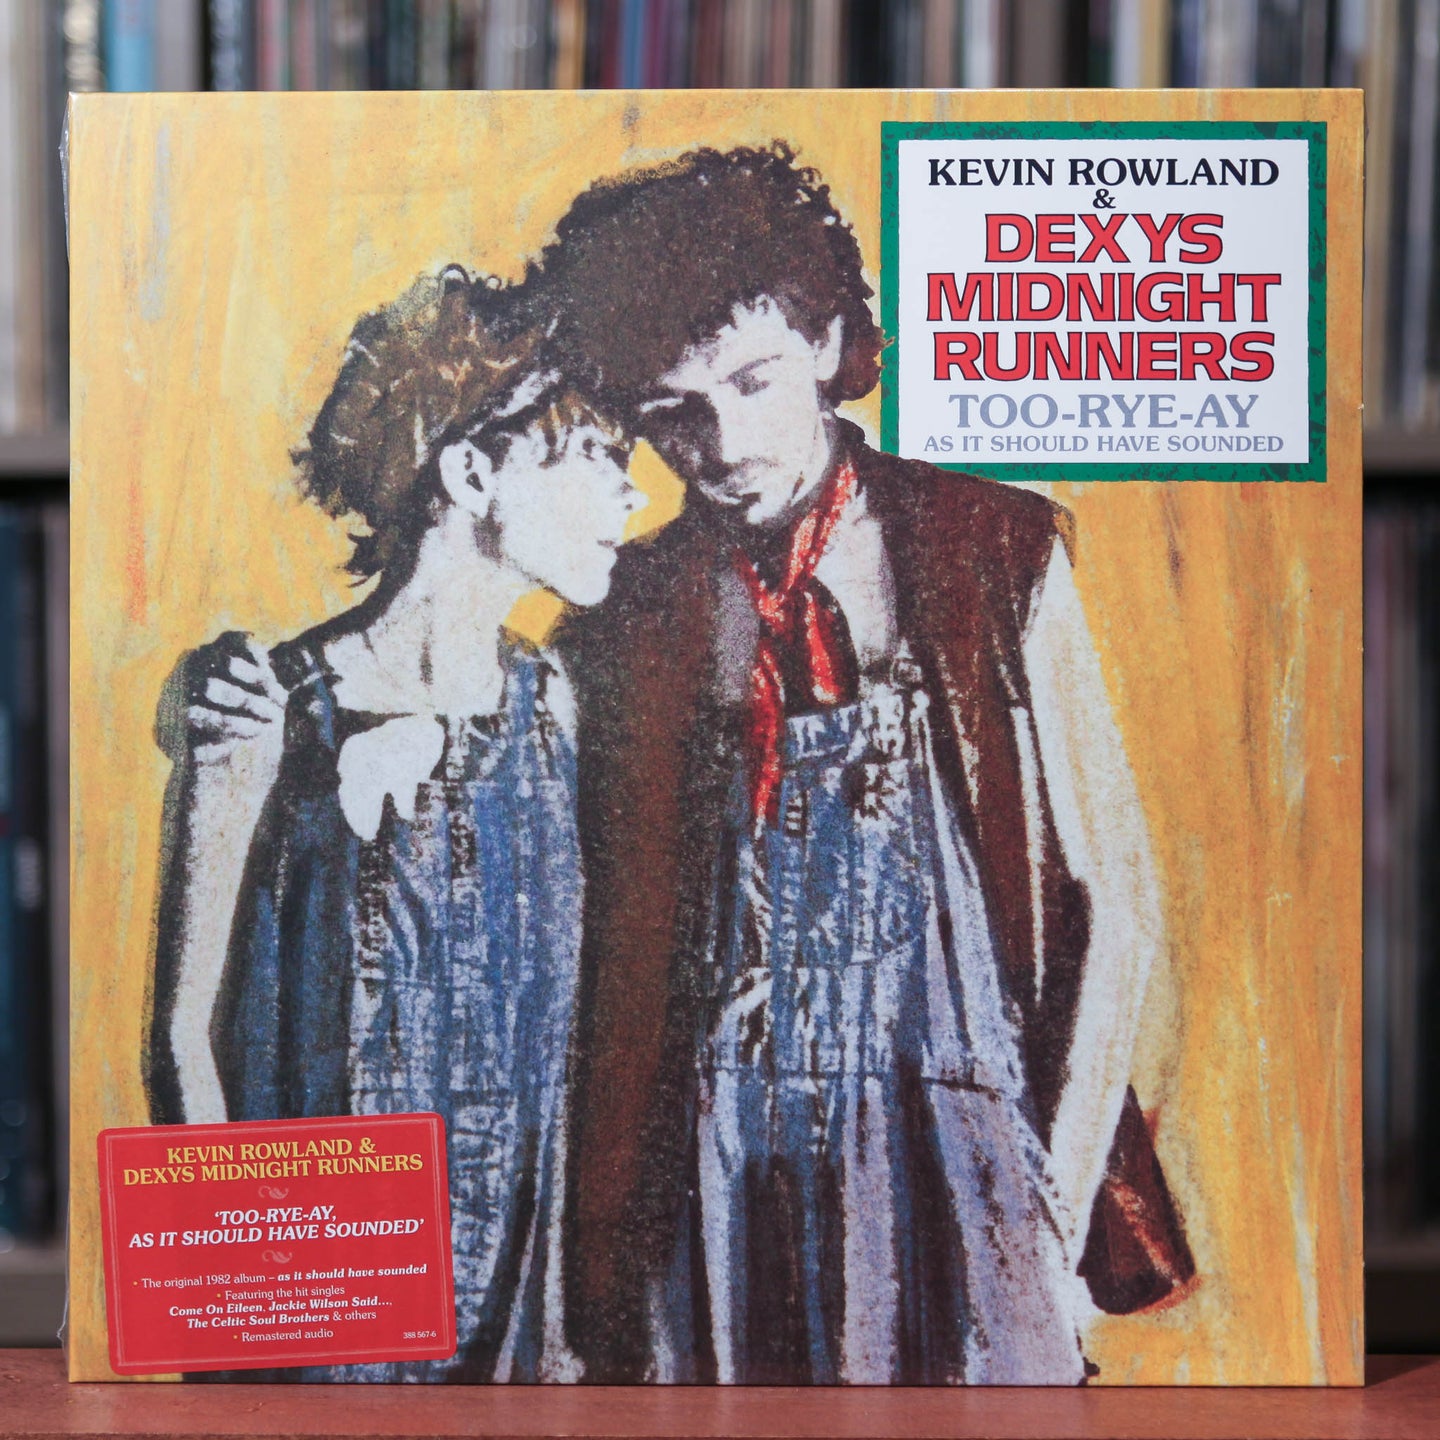 Kevin Rowland & Dexys Midnight Runners - Too-Rye-Ay As It Should Have Sounded - 2022 Mercury, SEALED